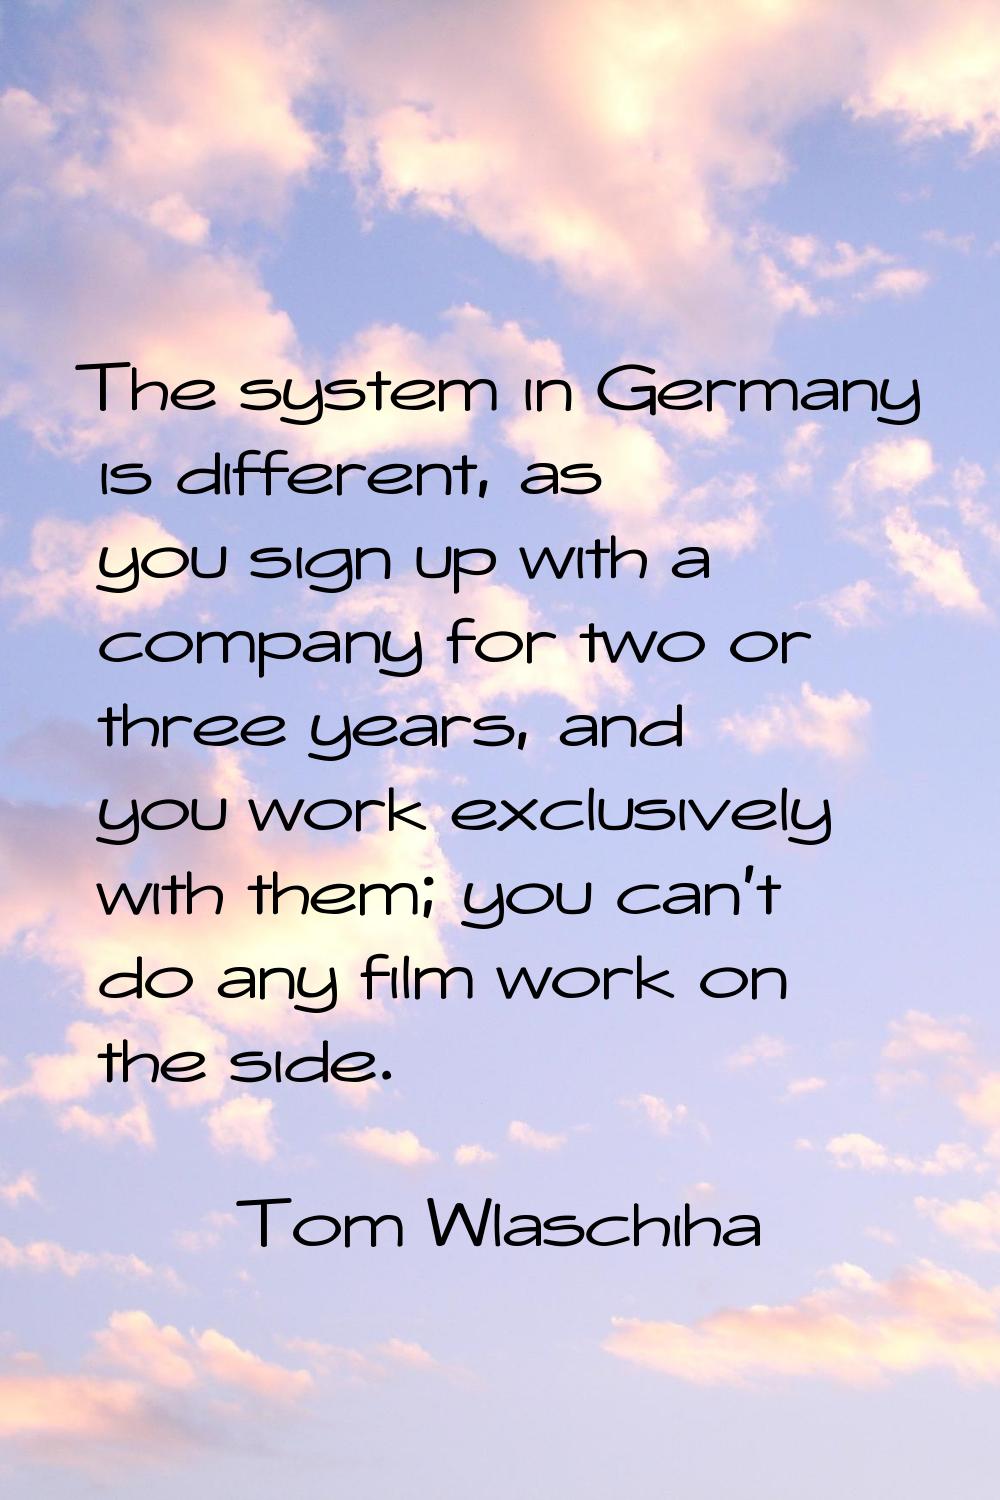 The system in Germany is different, as you sign up with a company for two or three years, and you w